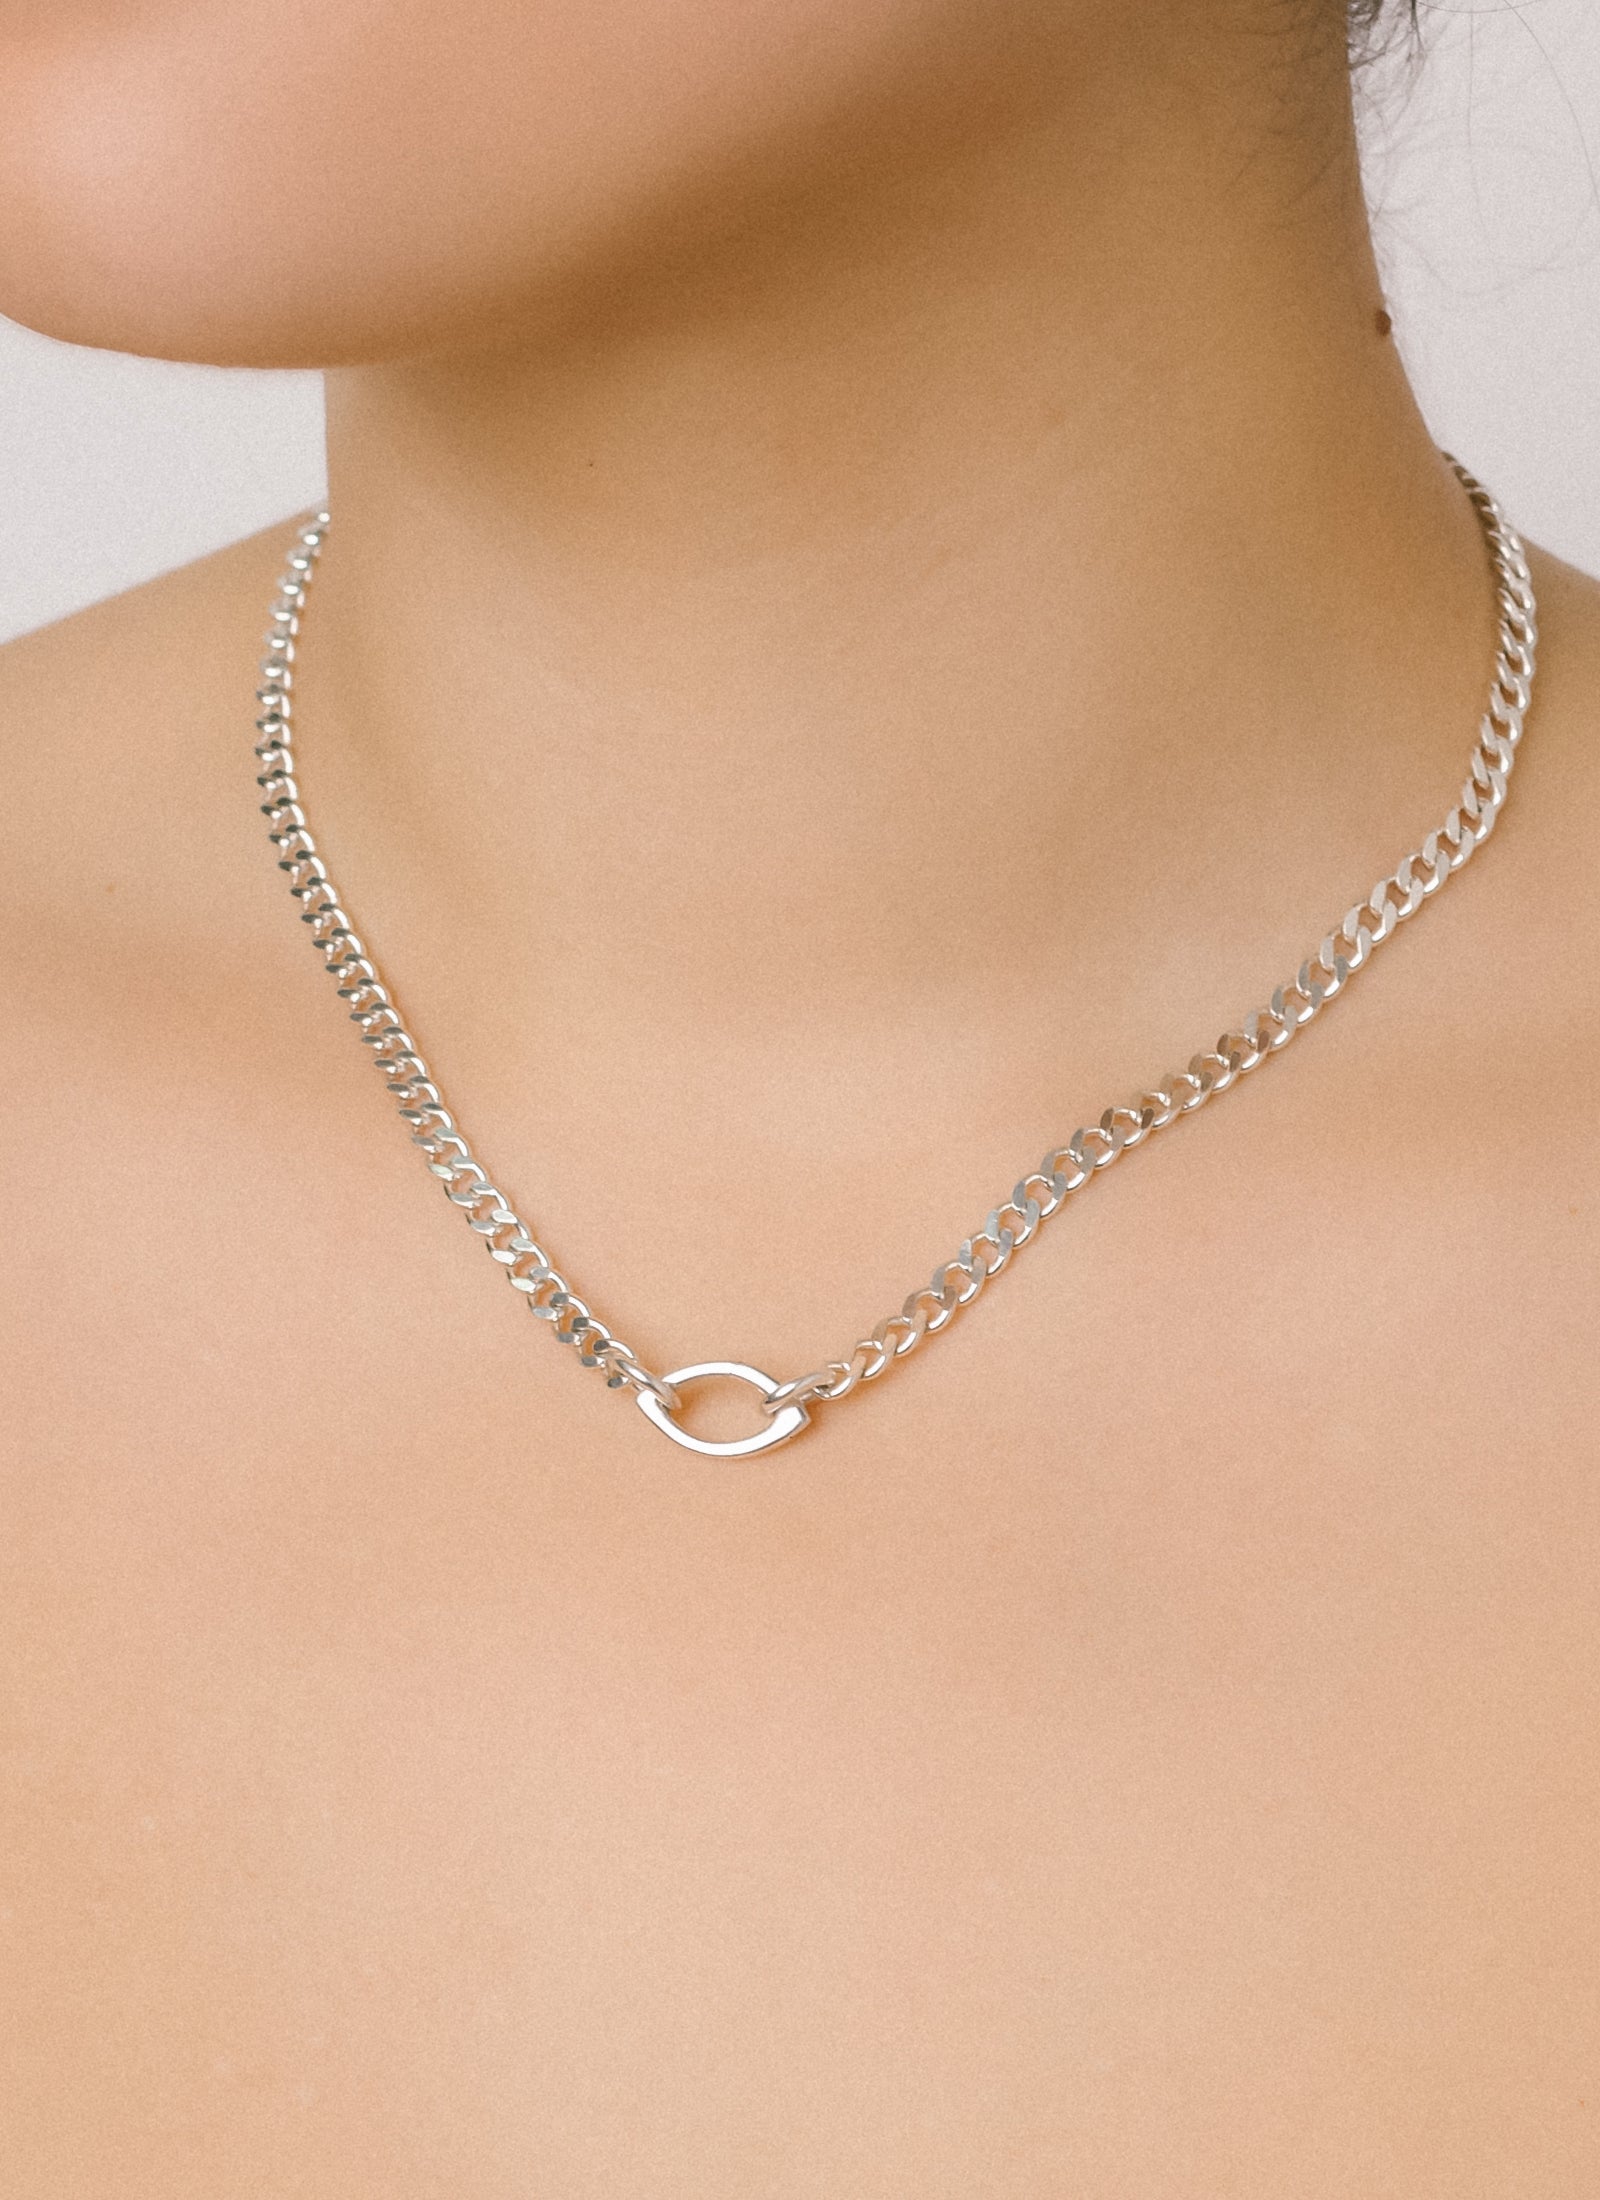 Solid Sterling Silver Pendant Curb Chain - Patented Anti Tarnish